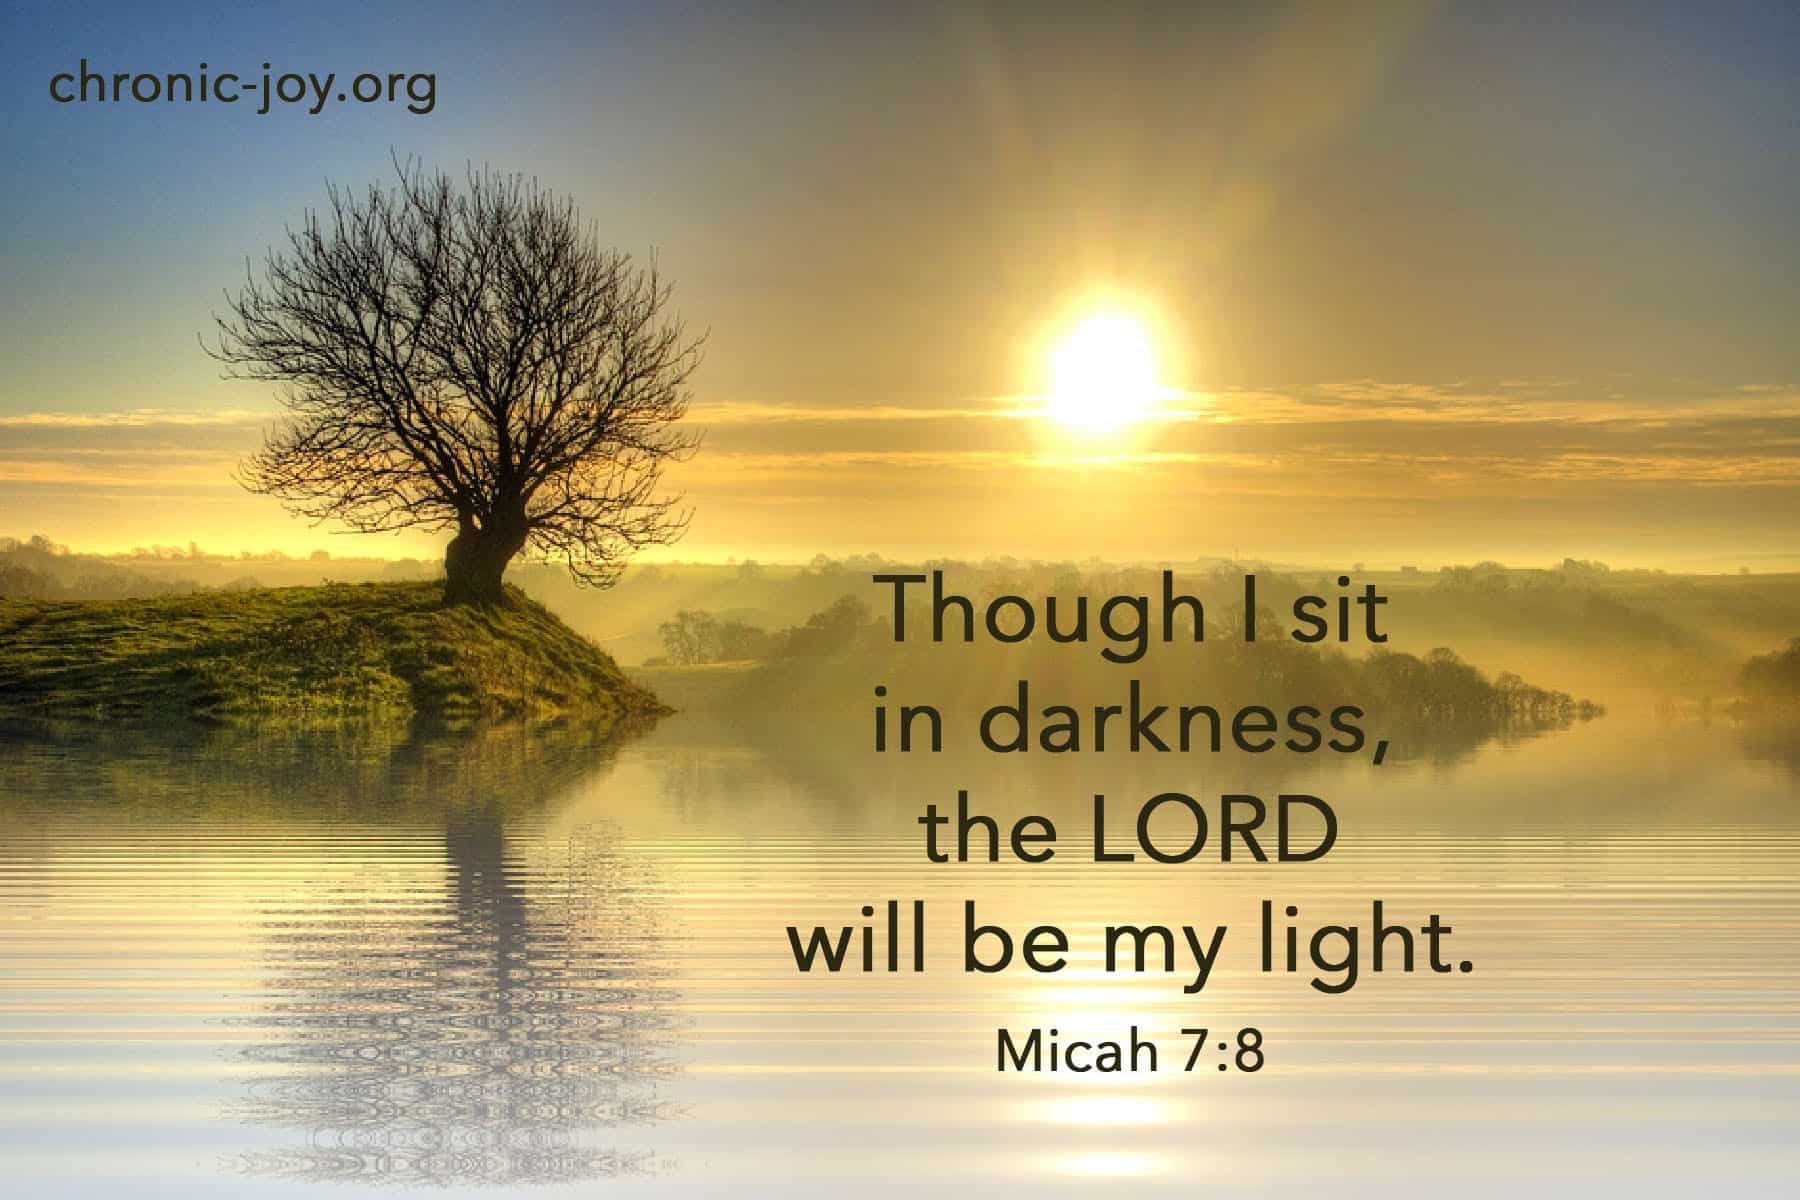 Though I sit in darkness, the Lord is my light. Micah 7:8